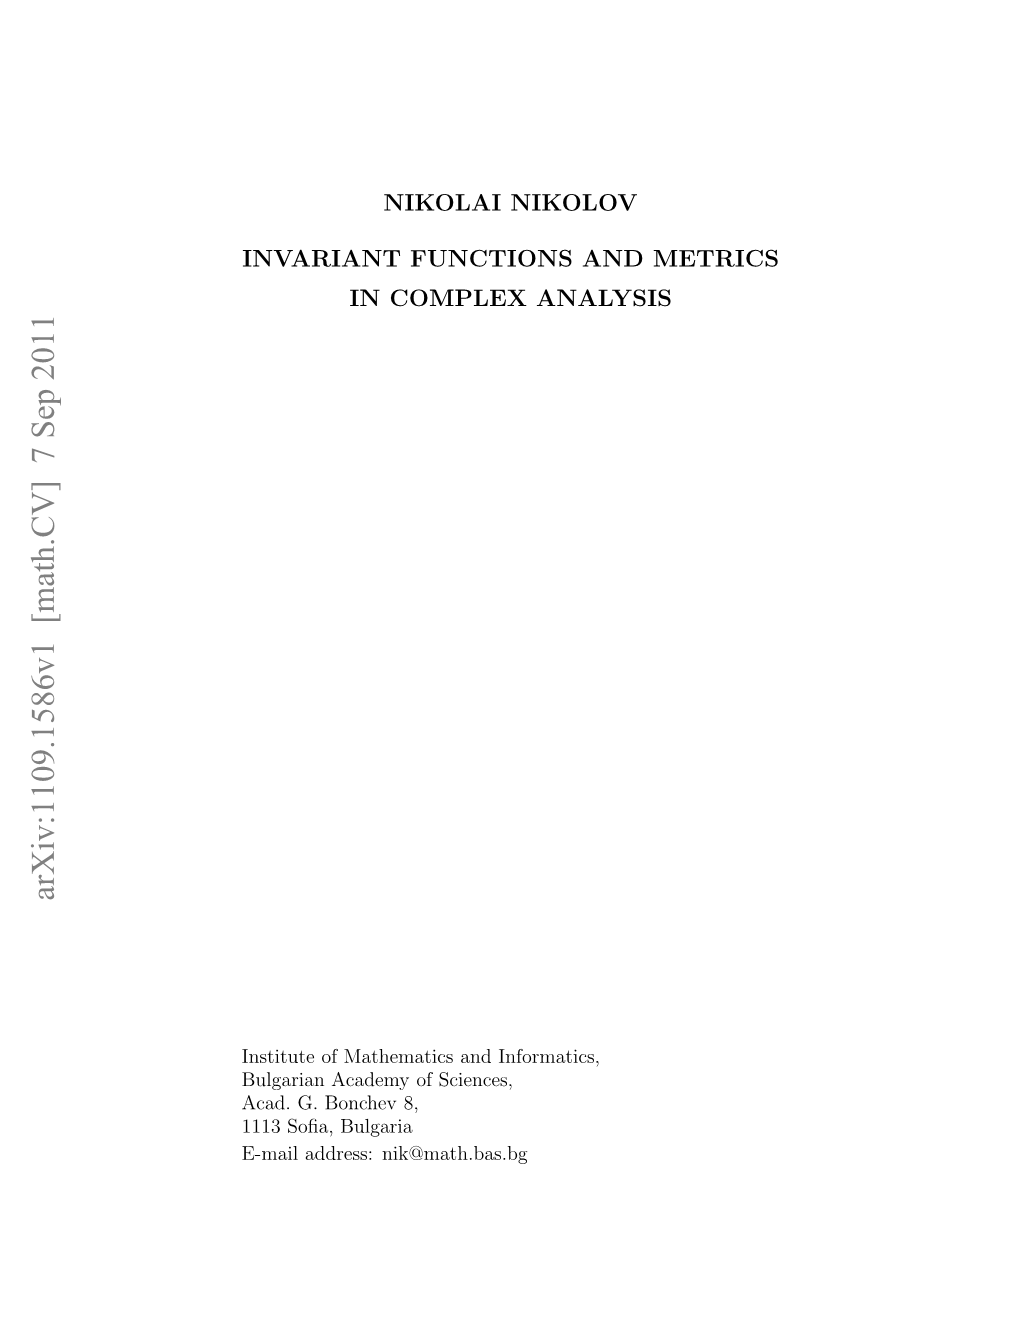 Invariant Functions and Metrics in Complex Analysis